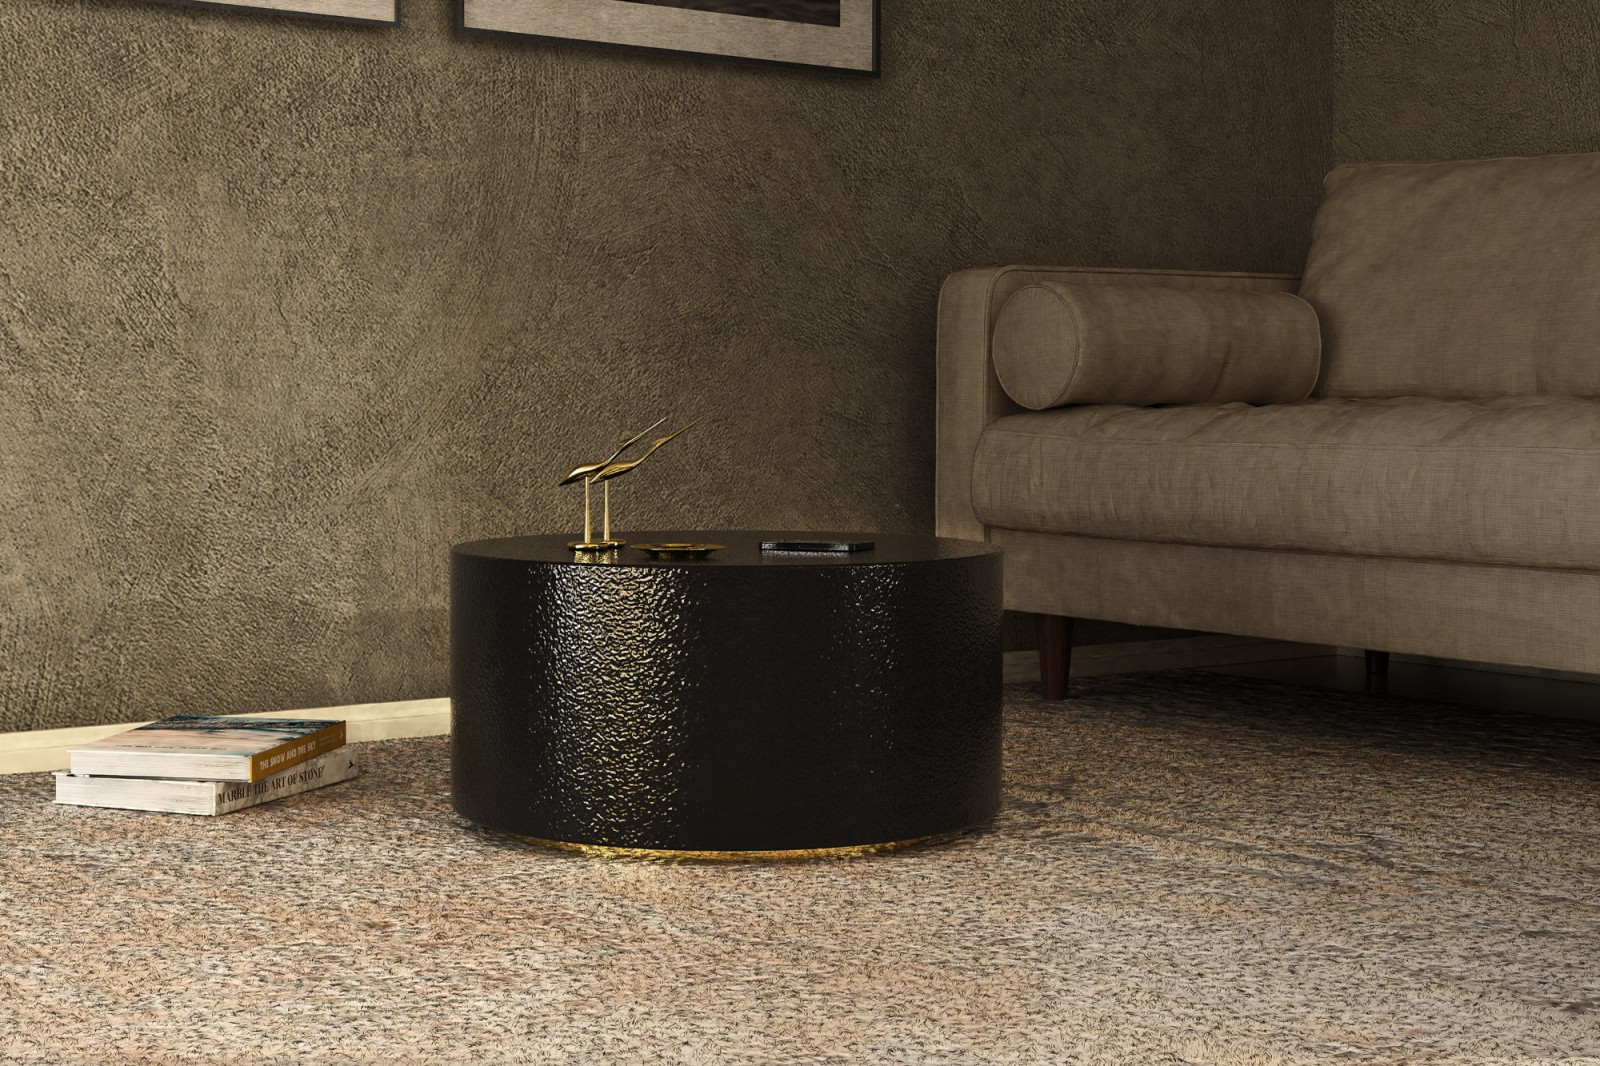 coffee-center-side-table-luxurious-polished-brass-black-textured-magnus-gansk-0-2553-1600-1400-100